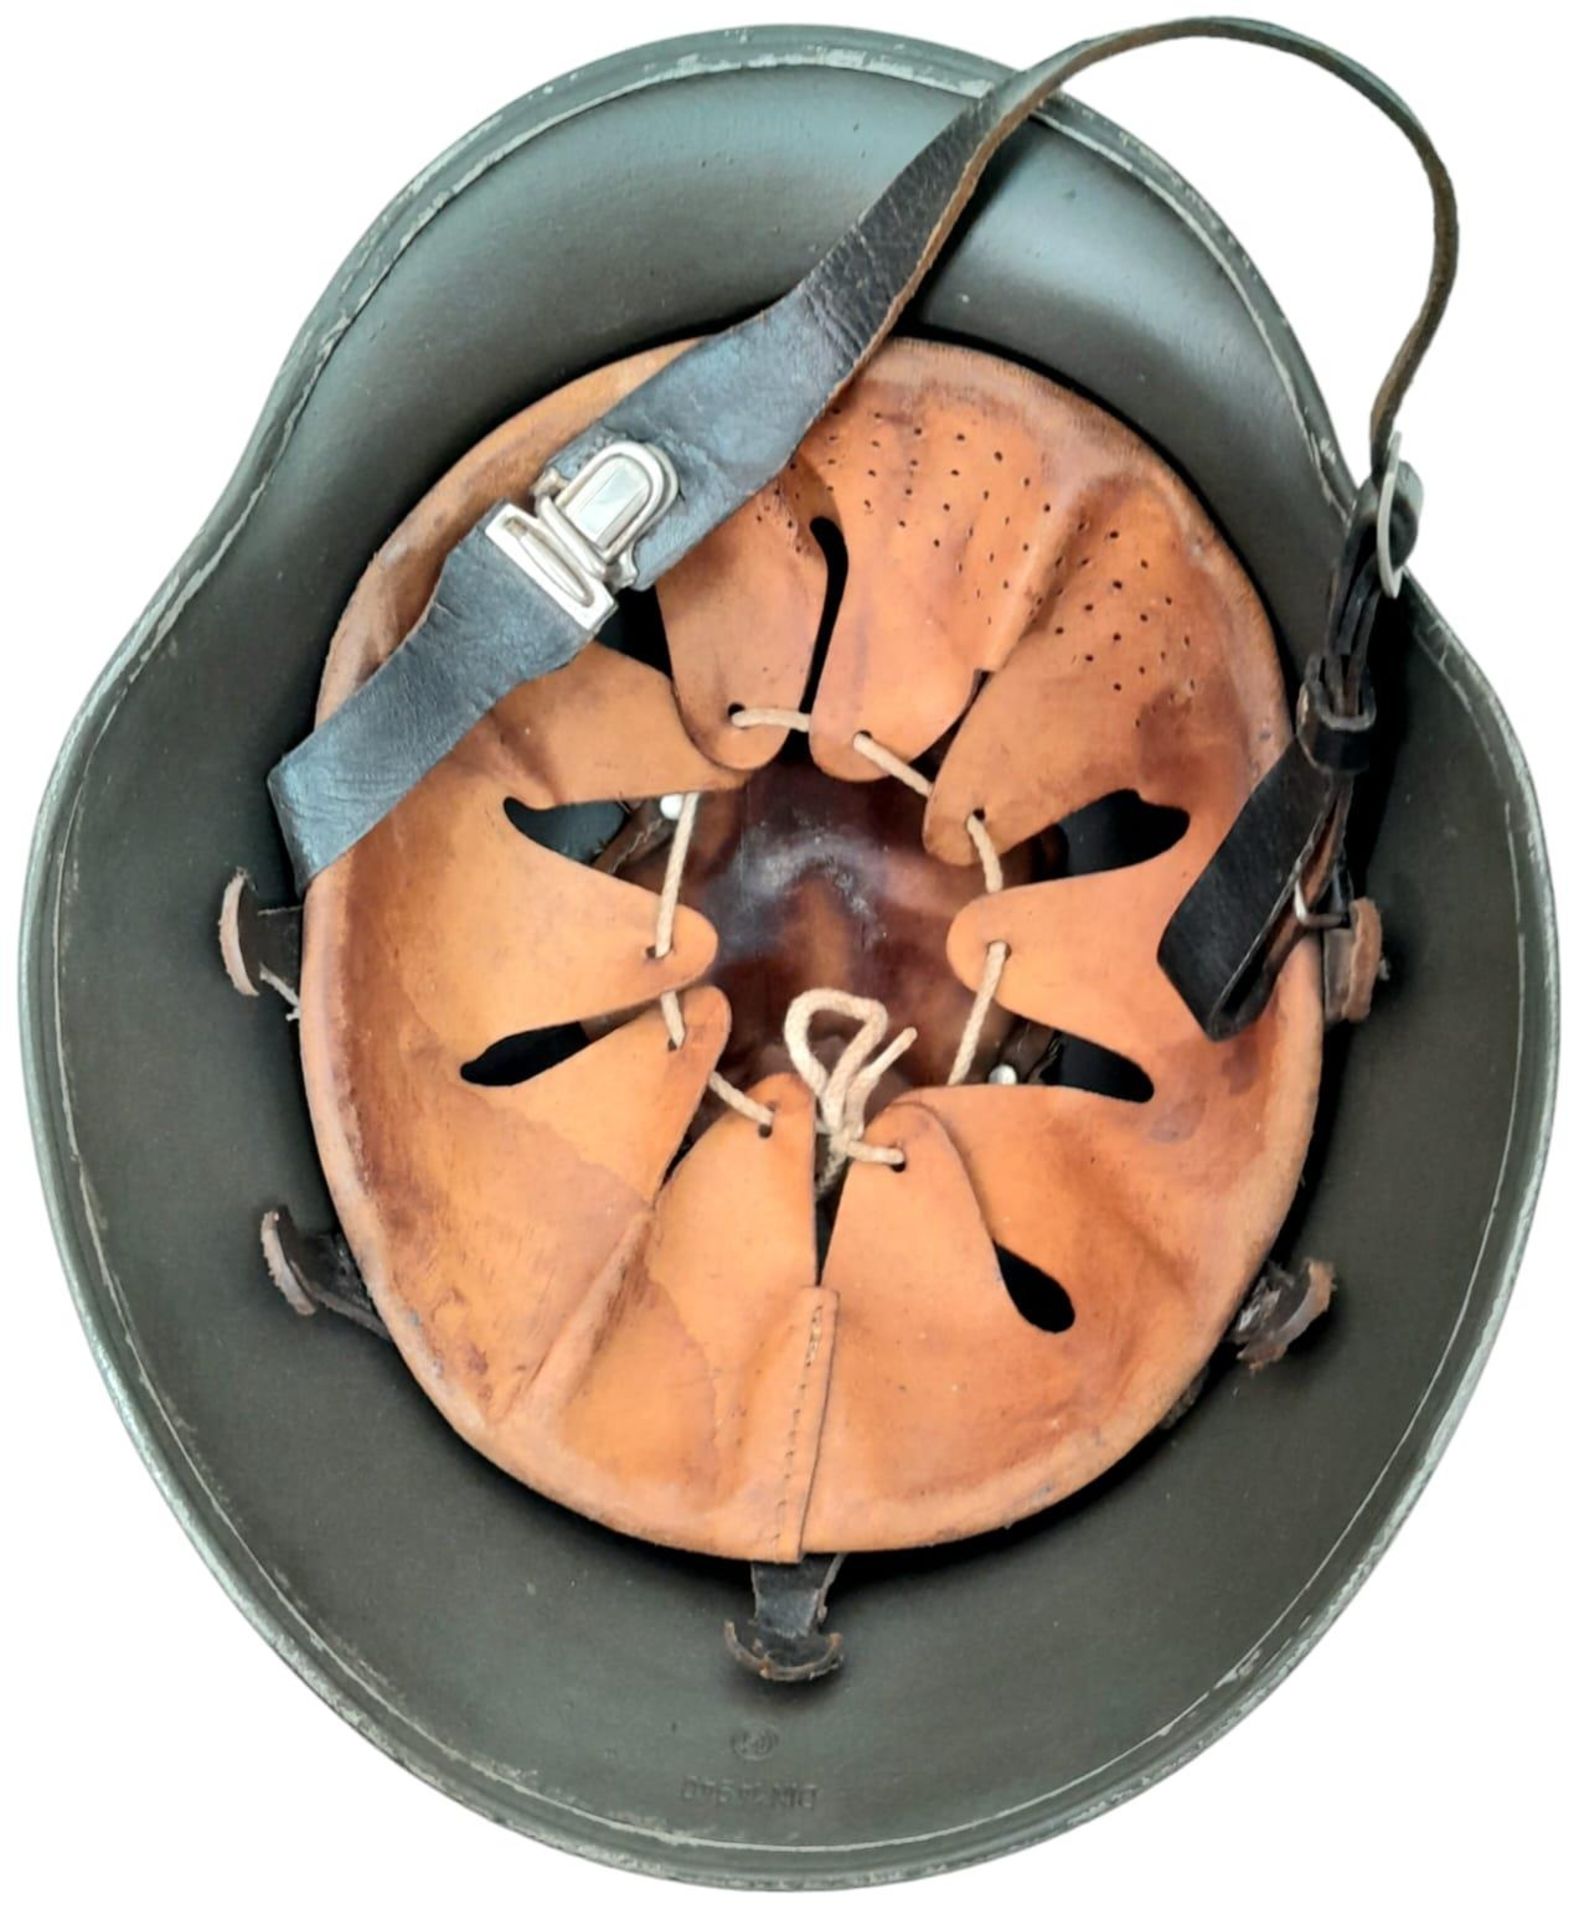 3rd Reich Lightweight Fire Helmet used by the German Aircraft Factory Arado Flugzeugwerke, whose - Image 5 of 5